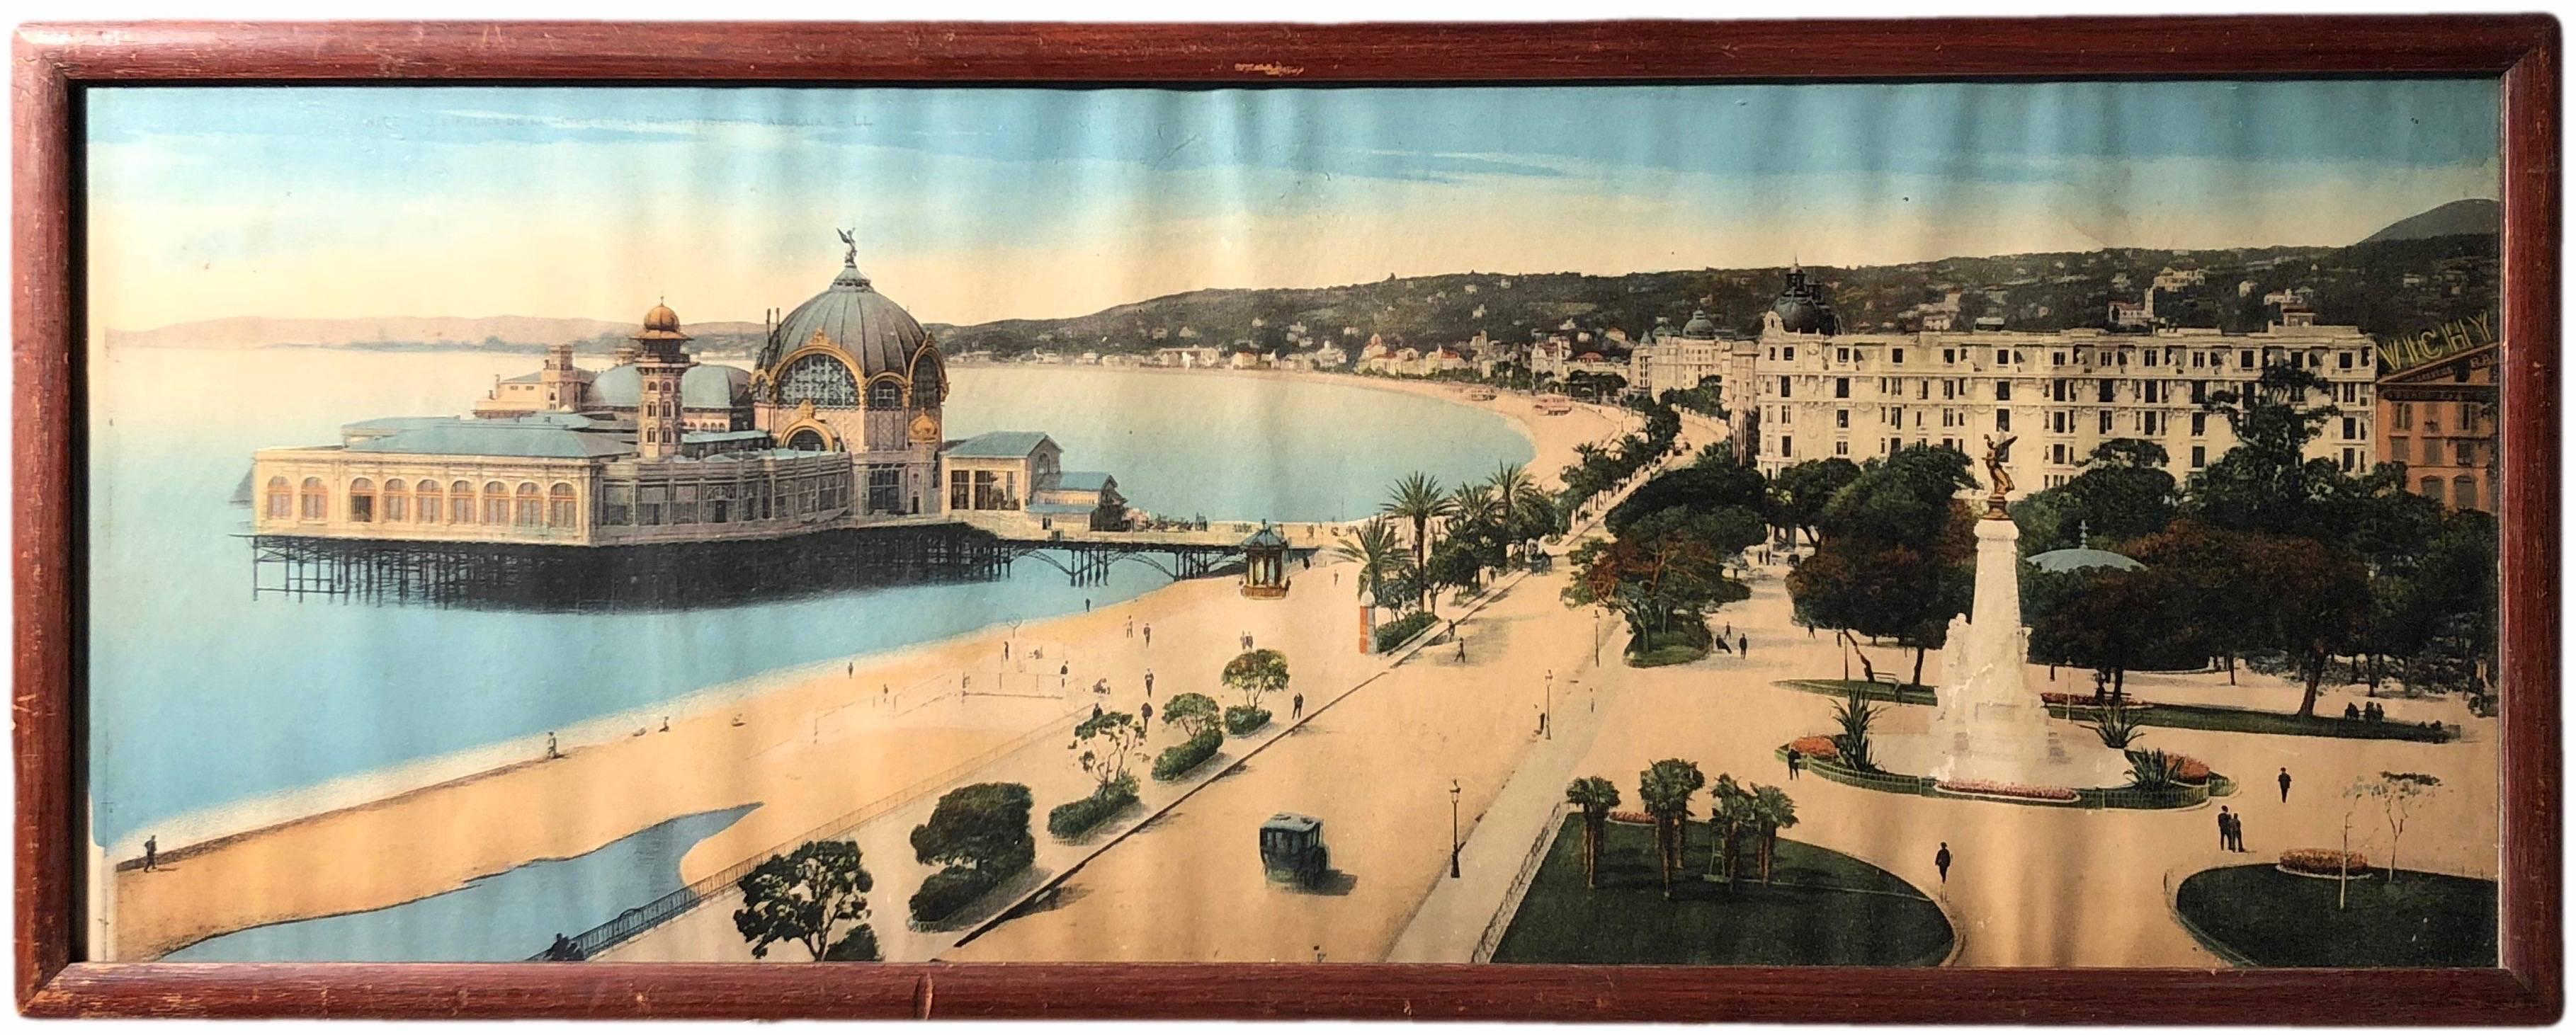 French antique colorized photos of nice (early 1900s), Promenade des Anglais, Palais de la Jetée (Palace on the wharf- gambling casino) and Monaco (1972), the port and the Olympic swimming pool, which is converted in a 1000m2 ice rink from December